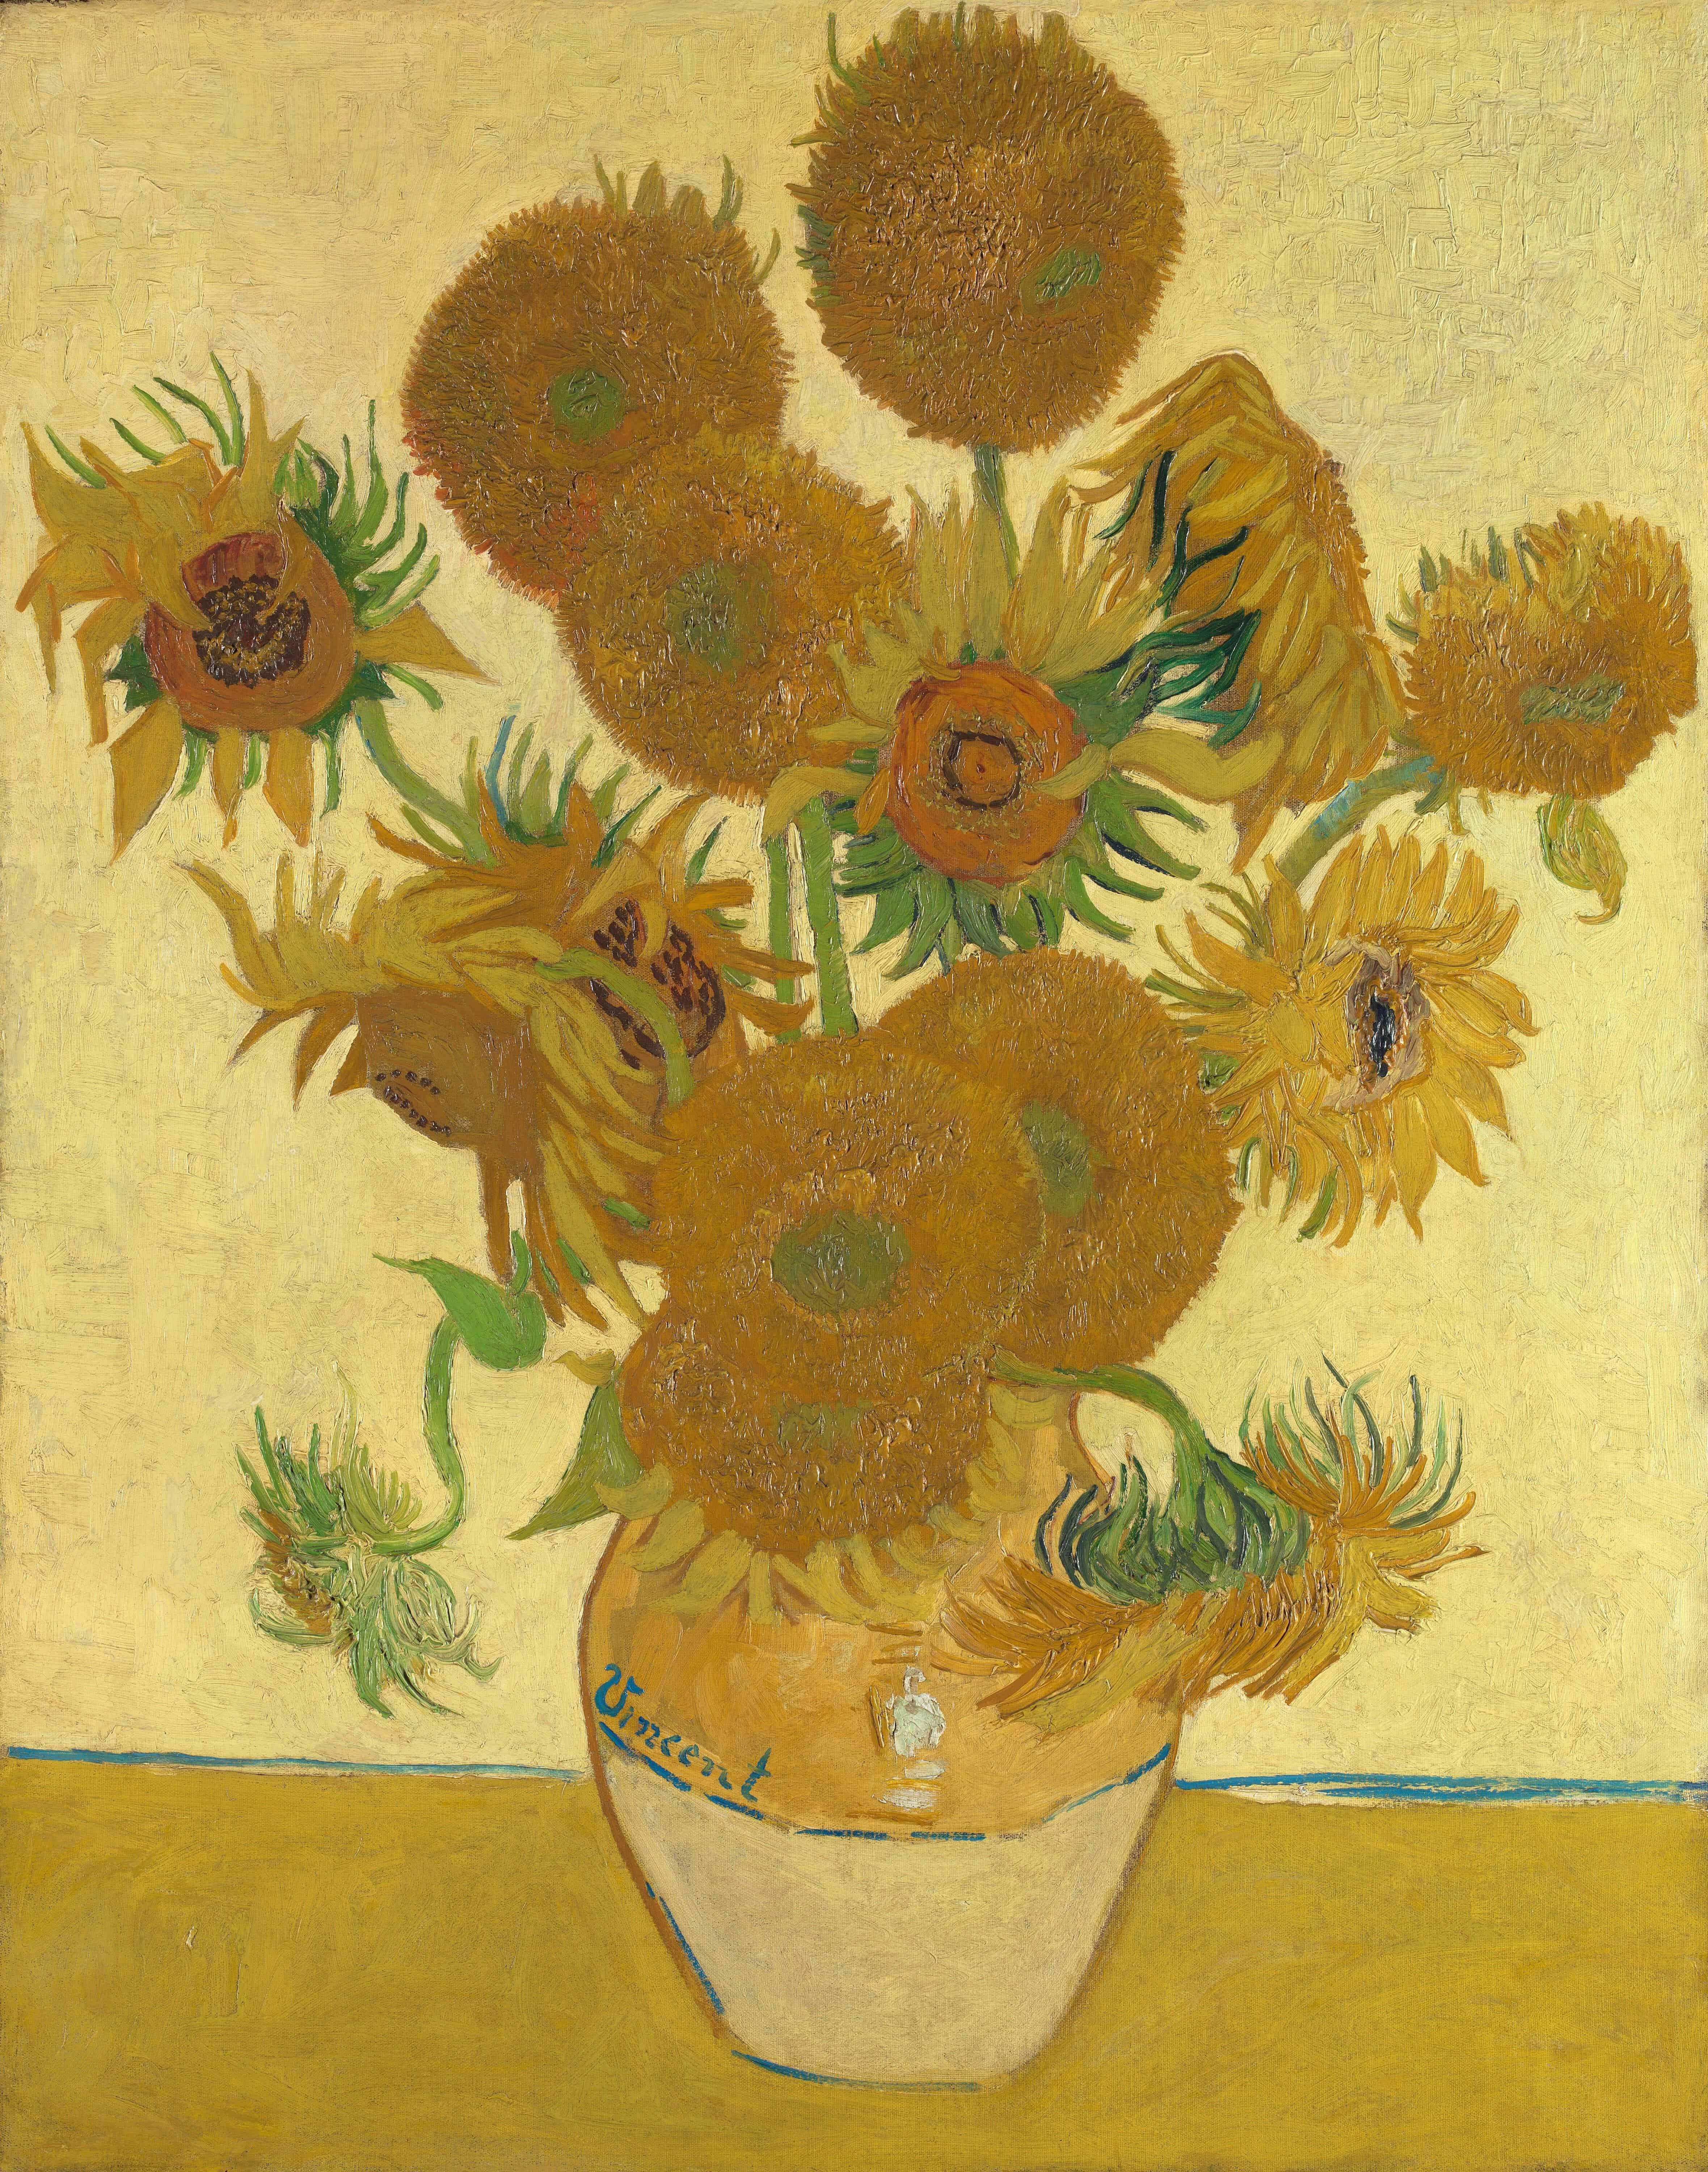 After 150 years of blossoming, Van Gogh's flowers might be wilting away.